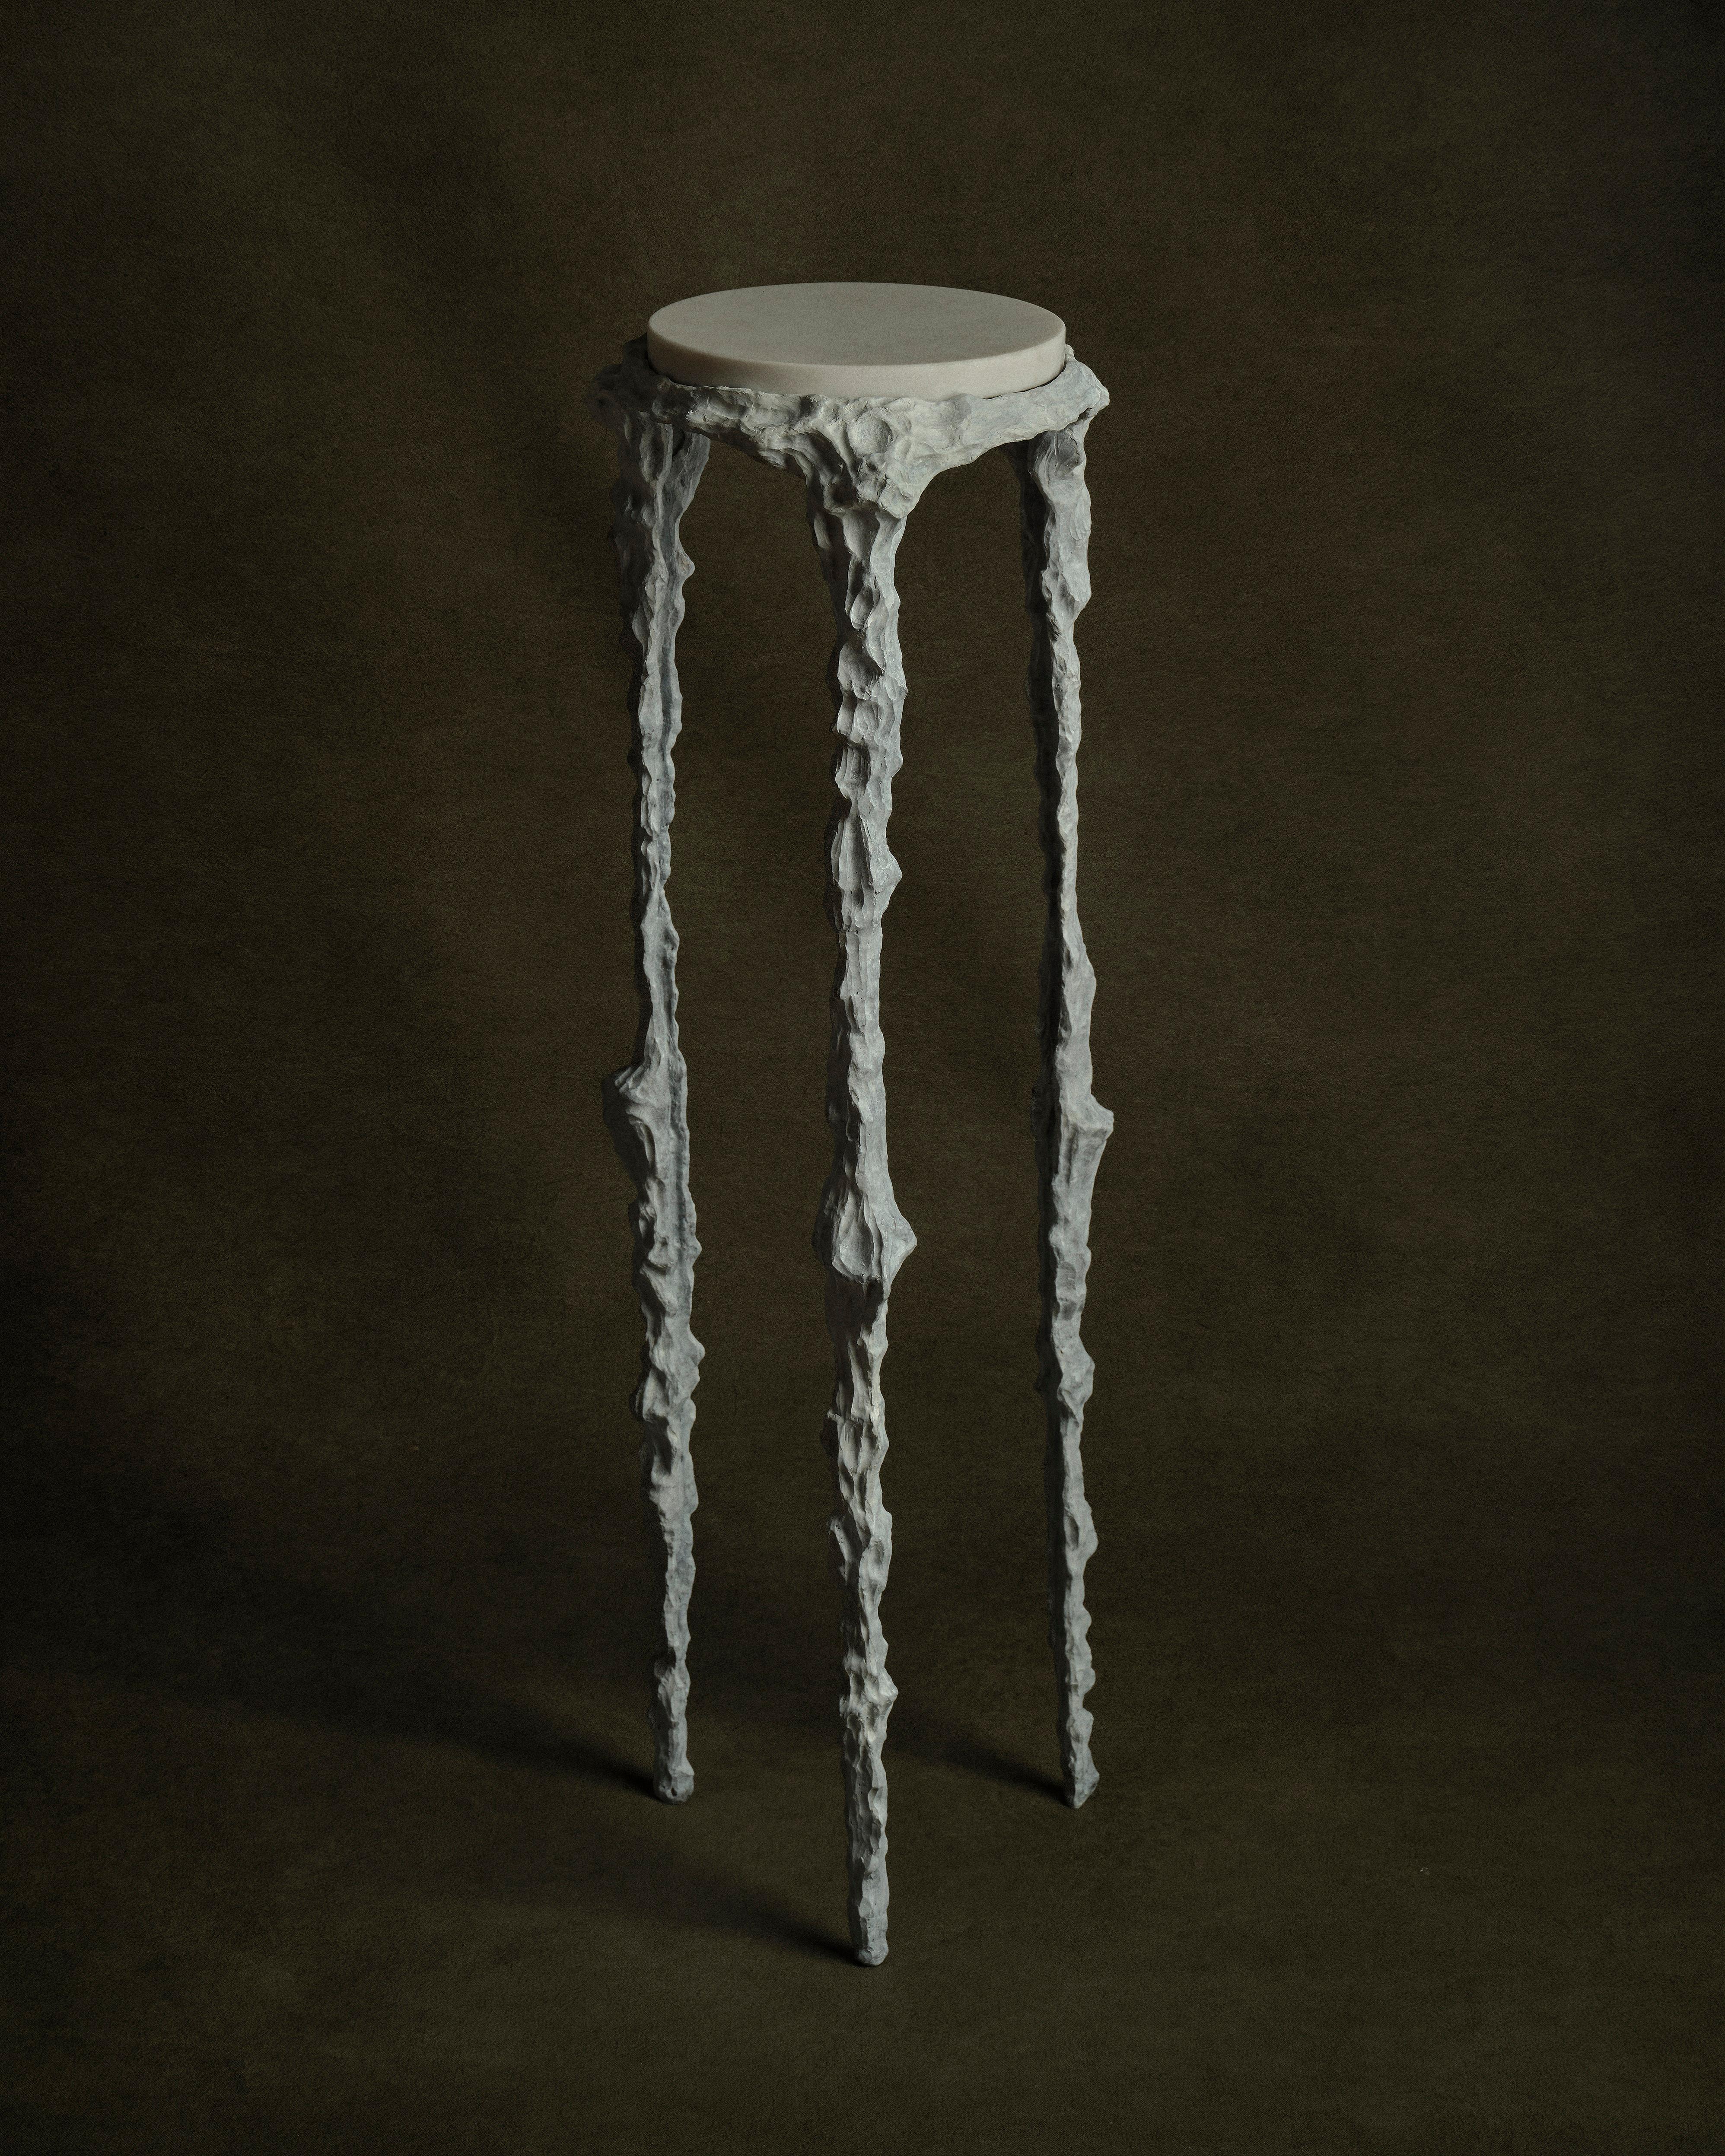 She's Lost Control pedestal table by William Guillon.
One of a Kind
Dimensions: D 29 x H 82 cm
Materials: Matt white patinated gilt bronze structure, white Prinos Greek marble with brushed finish.
Weight: 10 kg


William Guillon

William